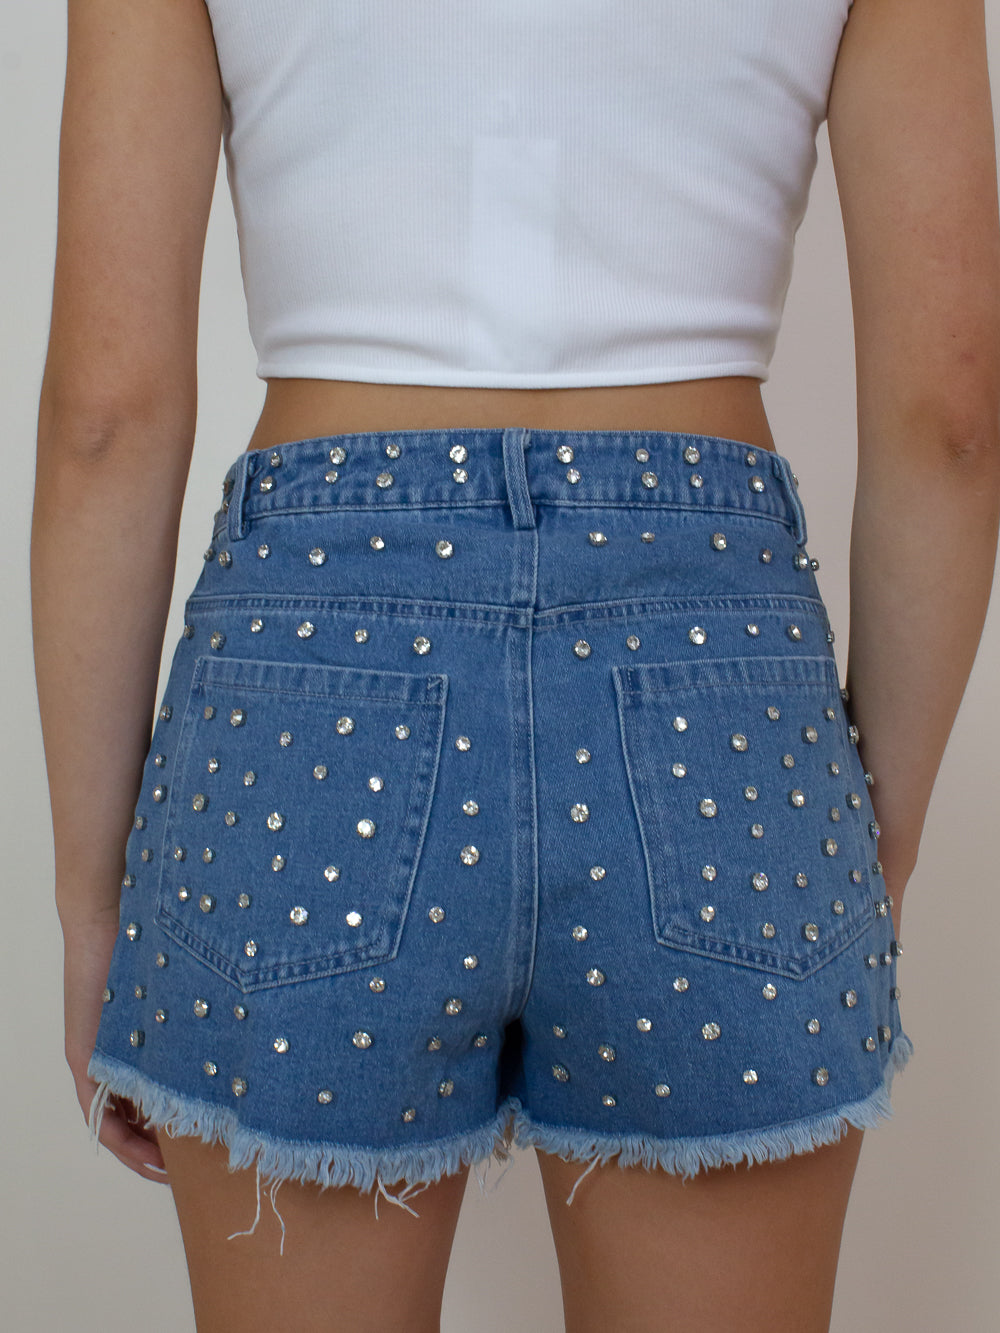 Cute denim shorts with all over rhinestone details and frayed hems 